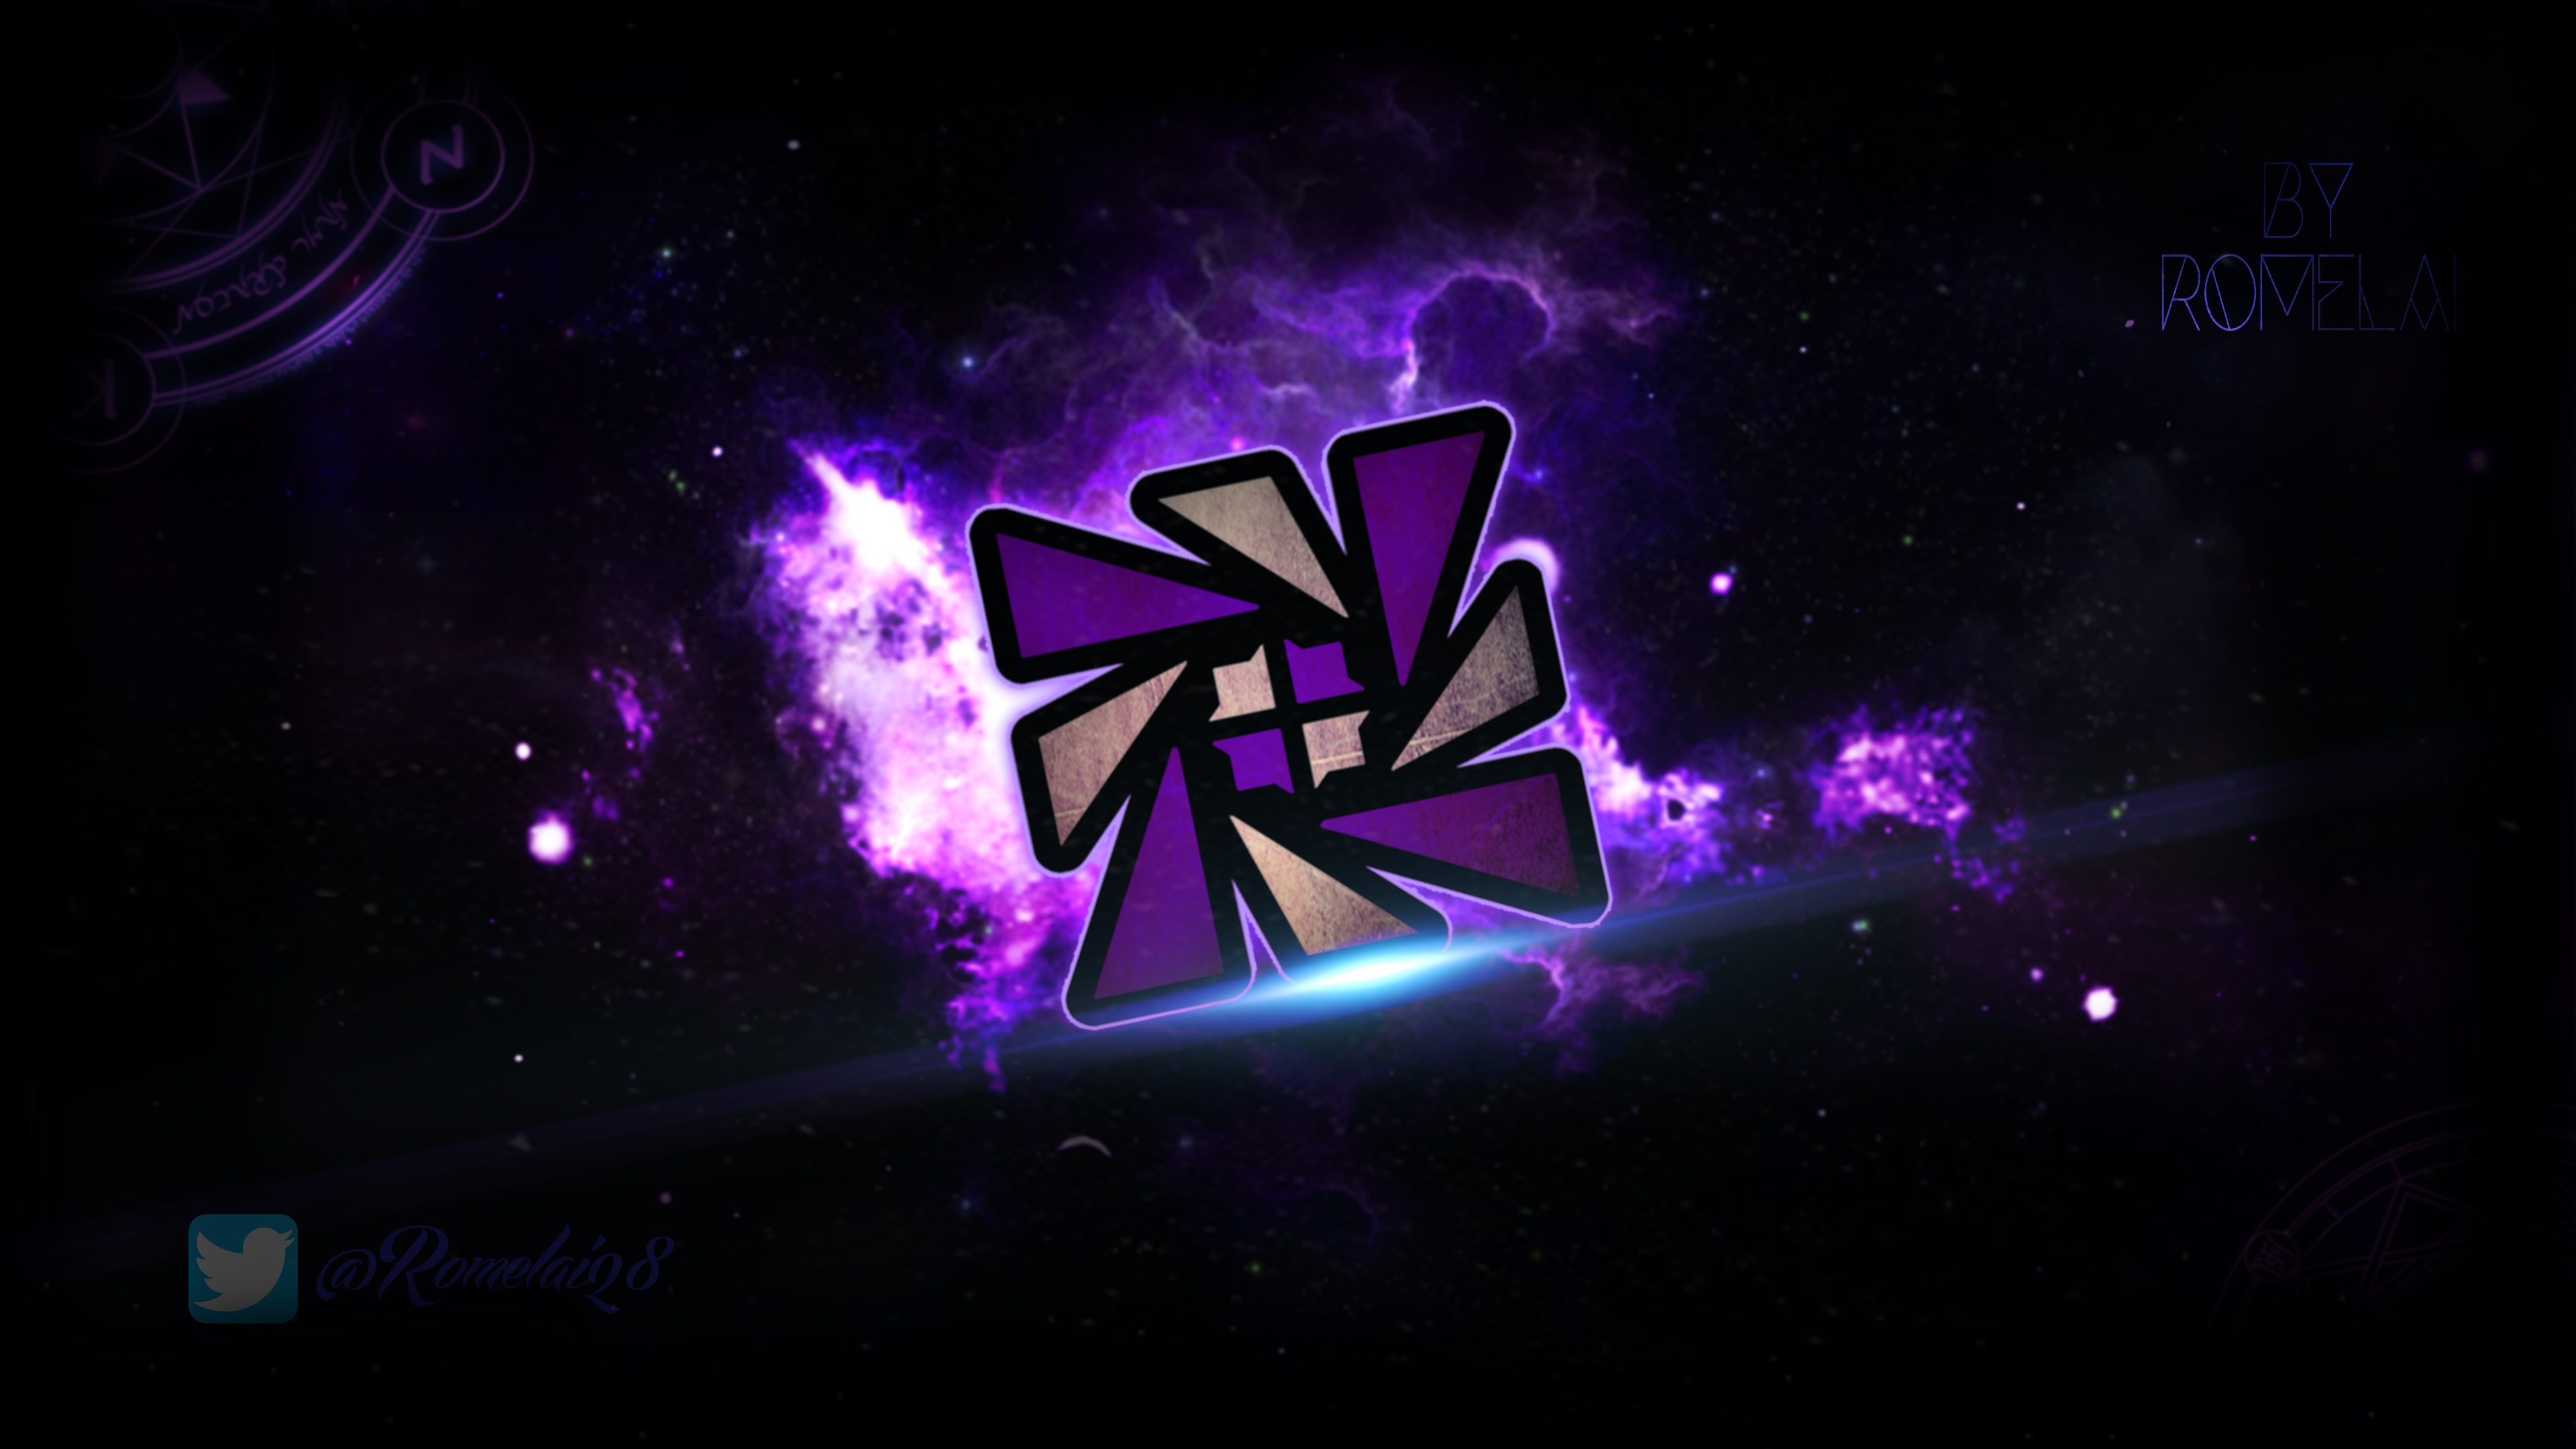 Geometry Dash Picture by Romelai28 - Image Abyss.